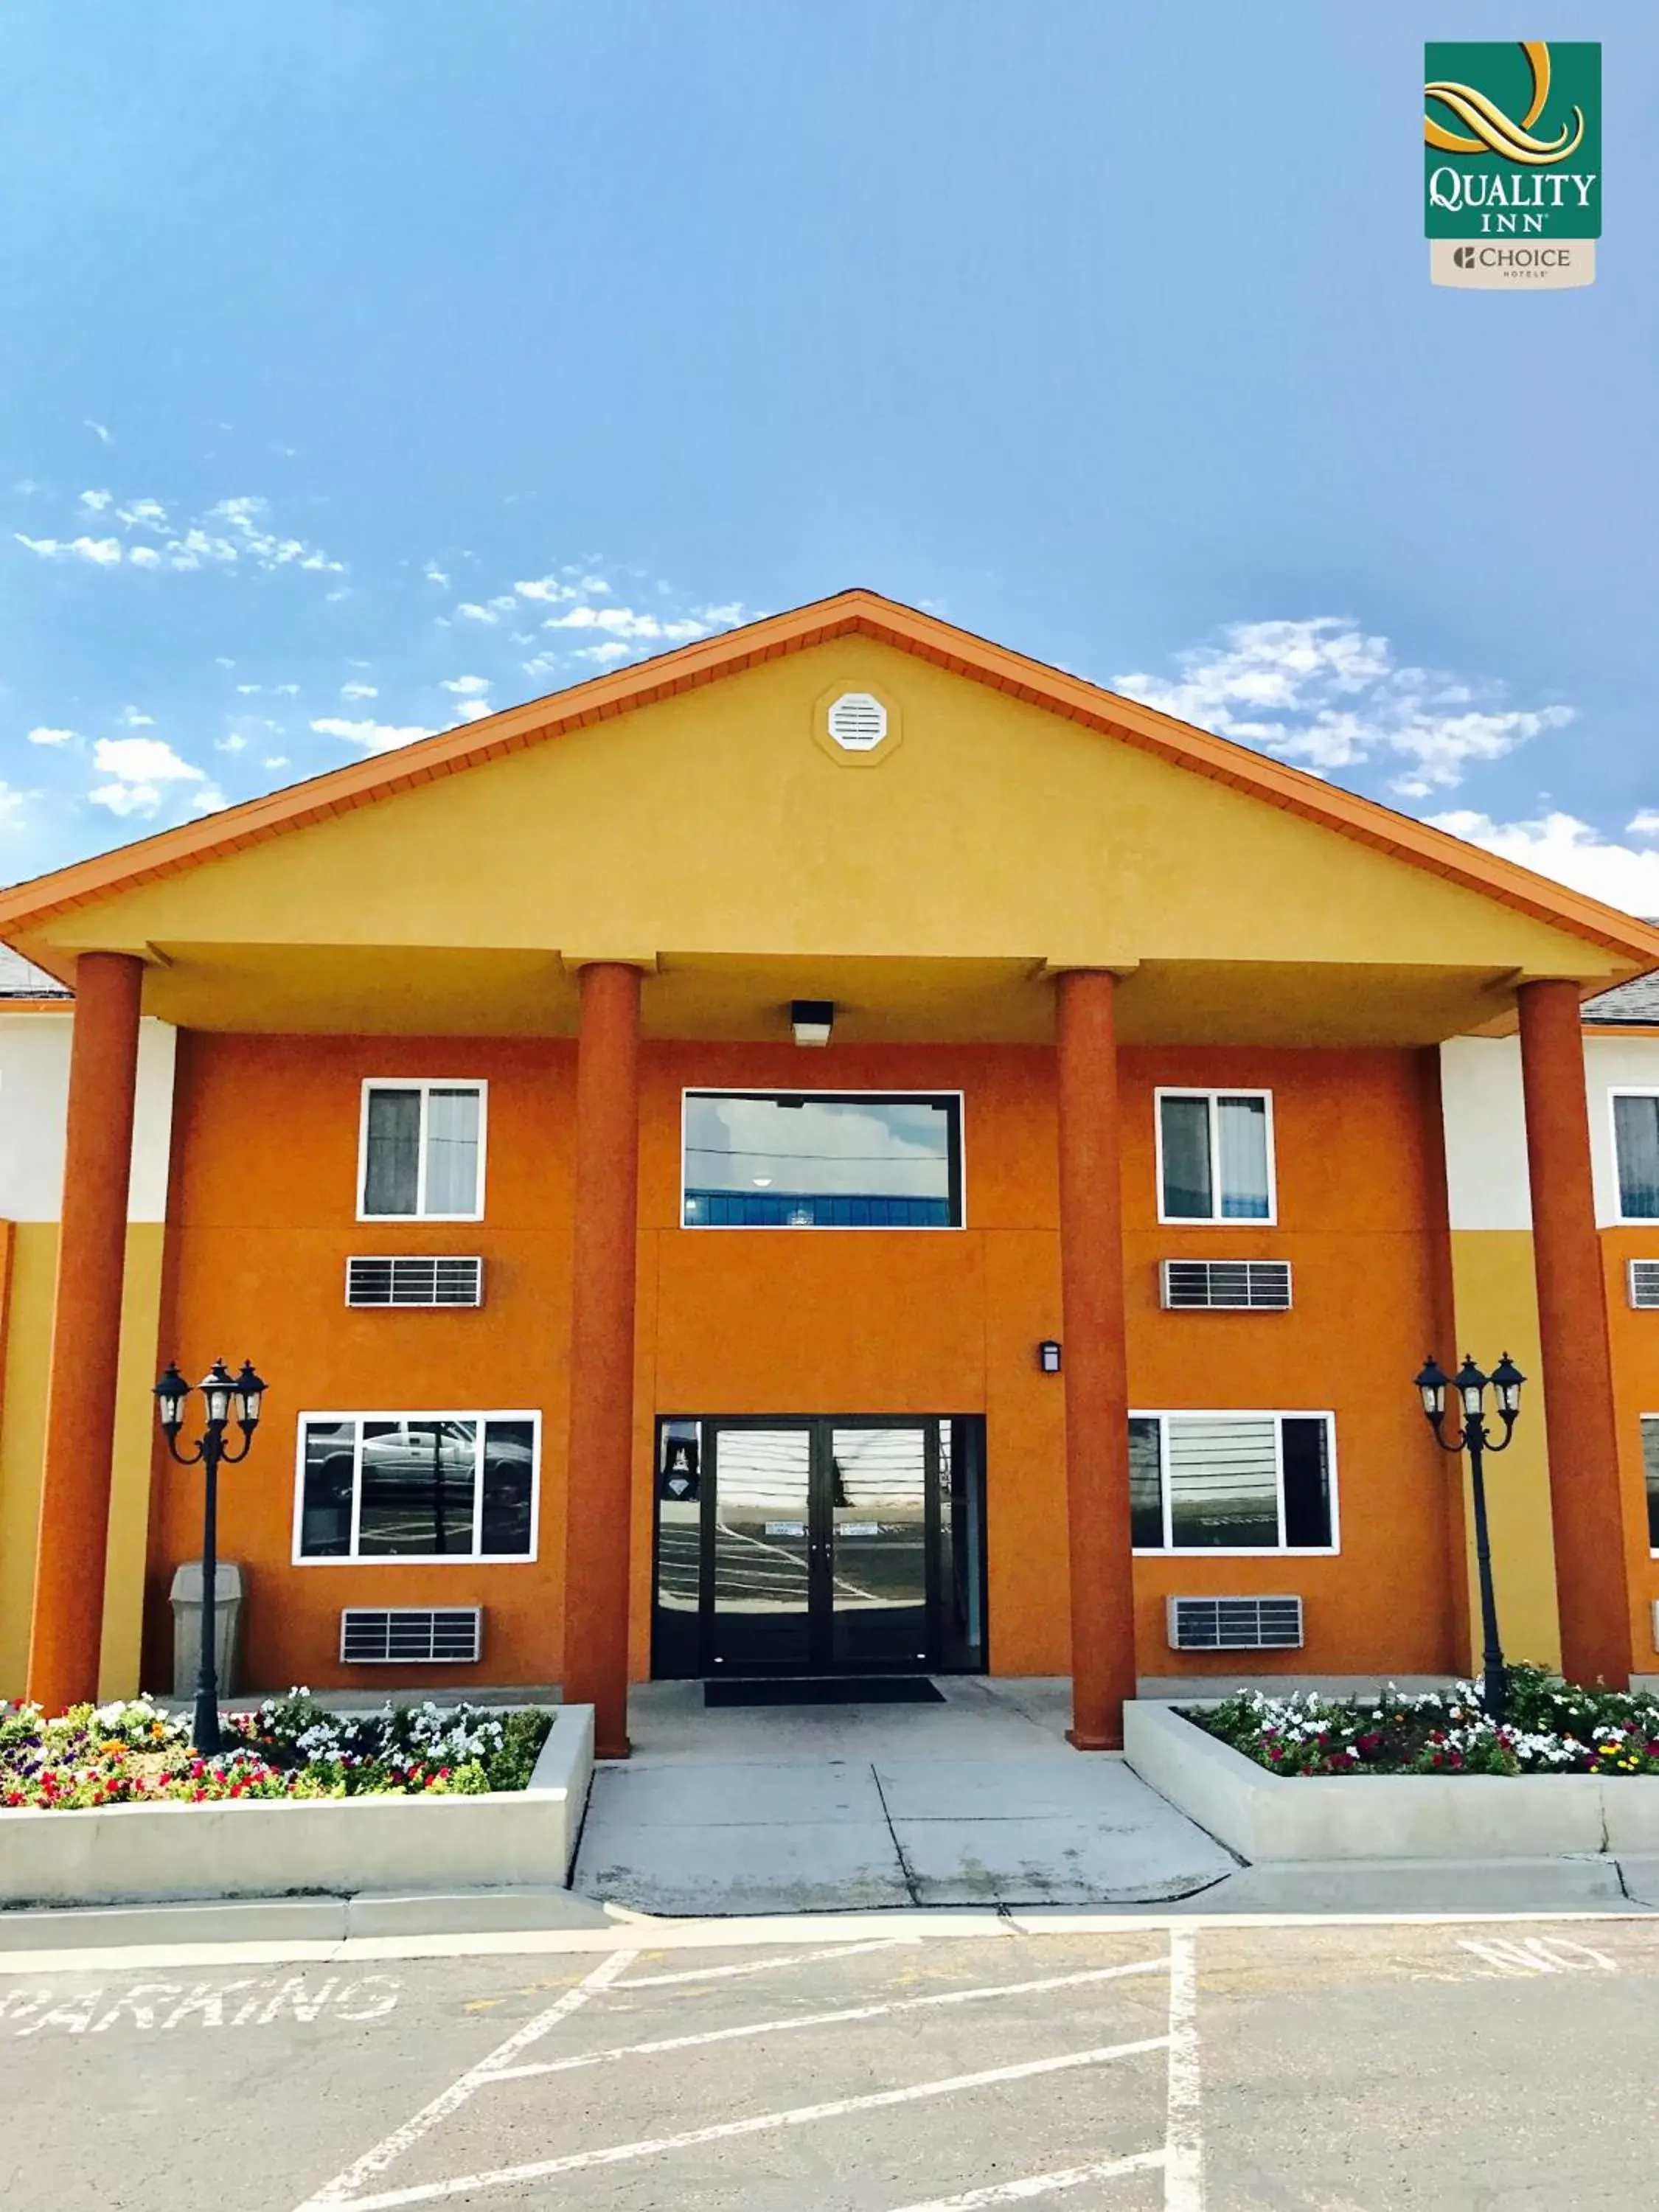 Property Building in Quality Inn Price Gateway to Moab National Parks